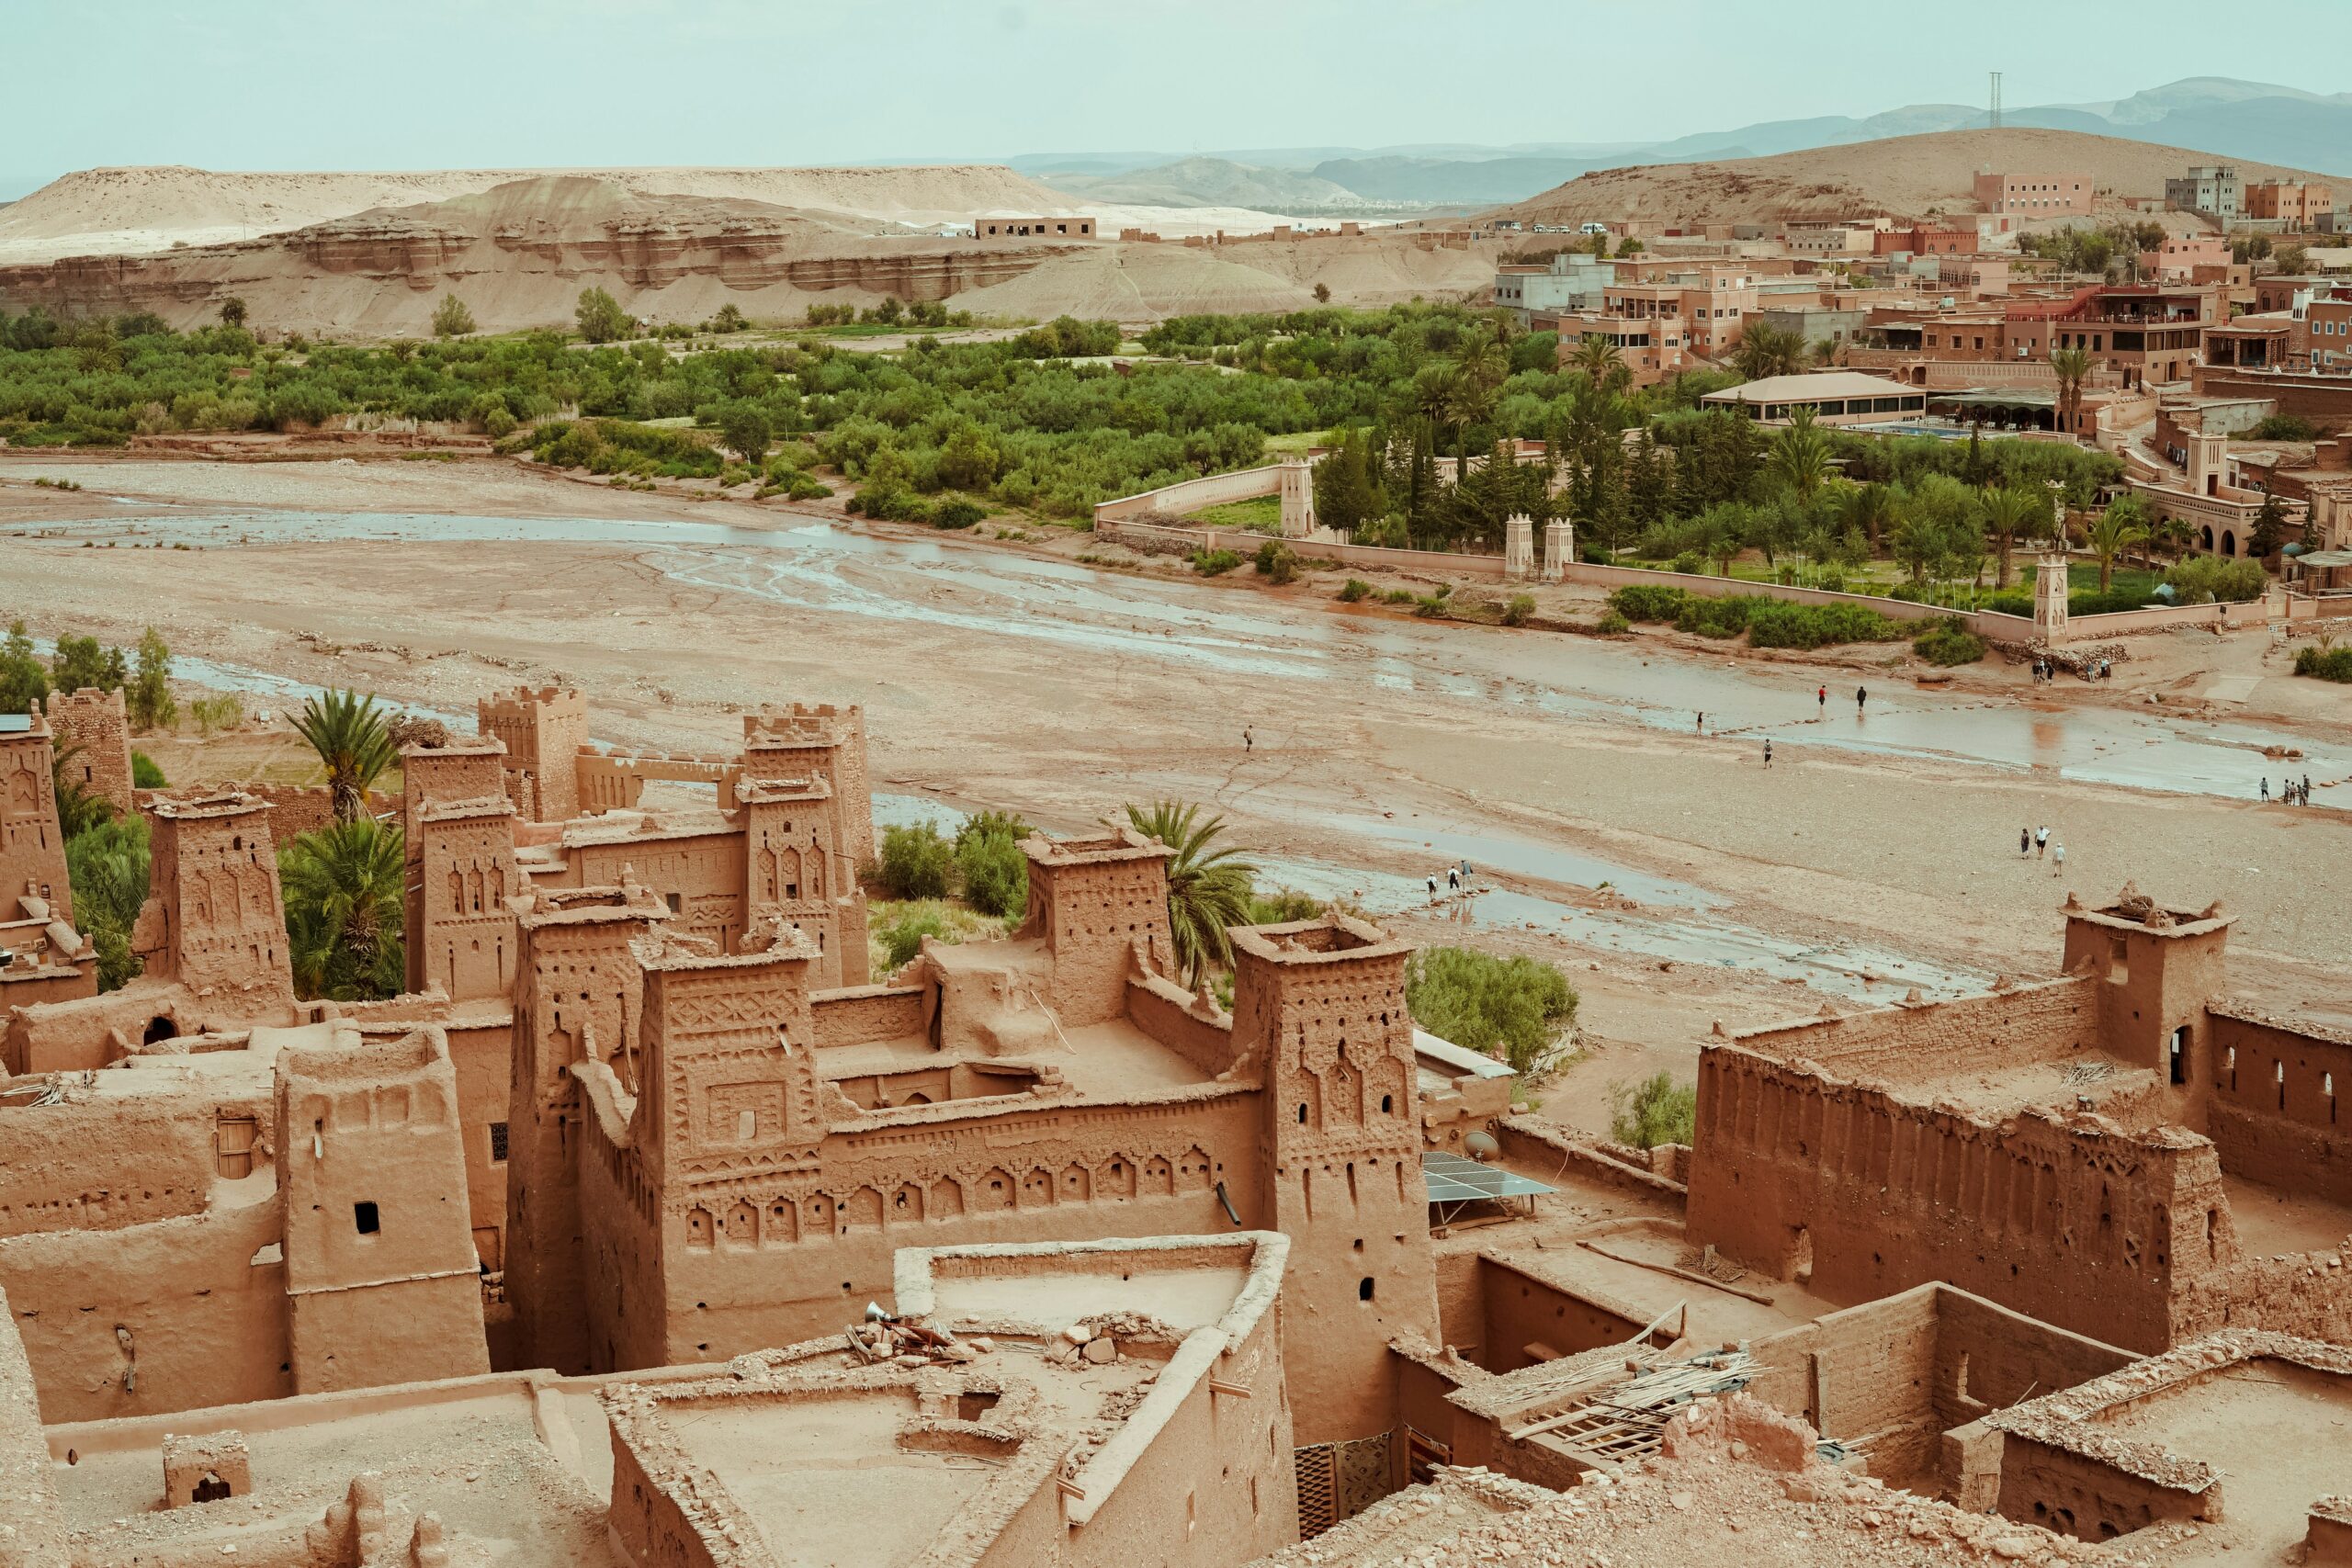 The history of Ait Ben Haddou Palace a world heritage site that strengthens the Moroccan tourist offer